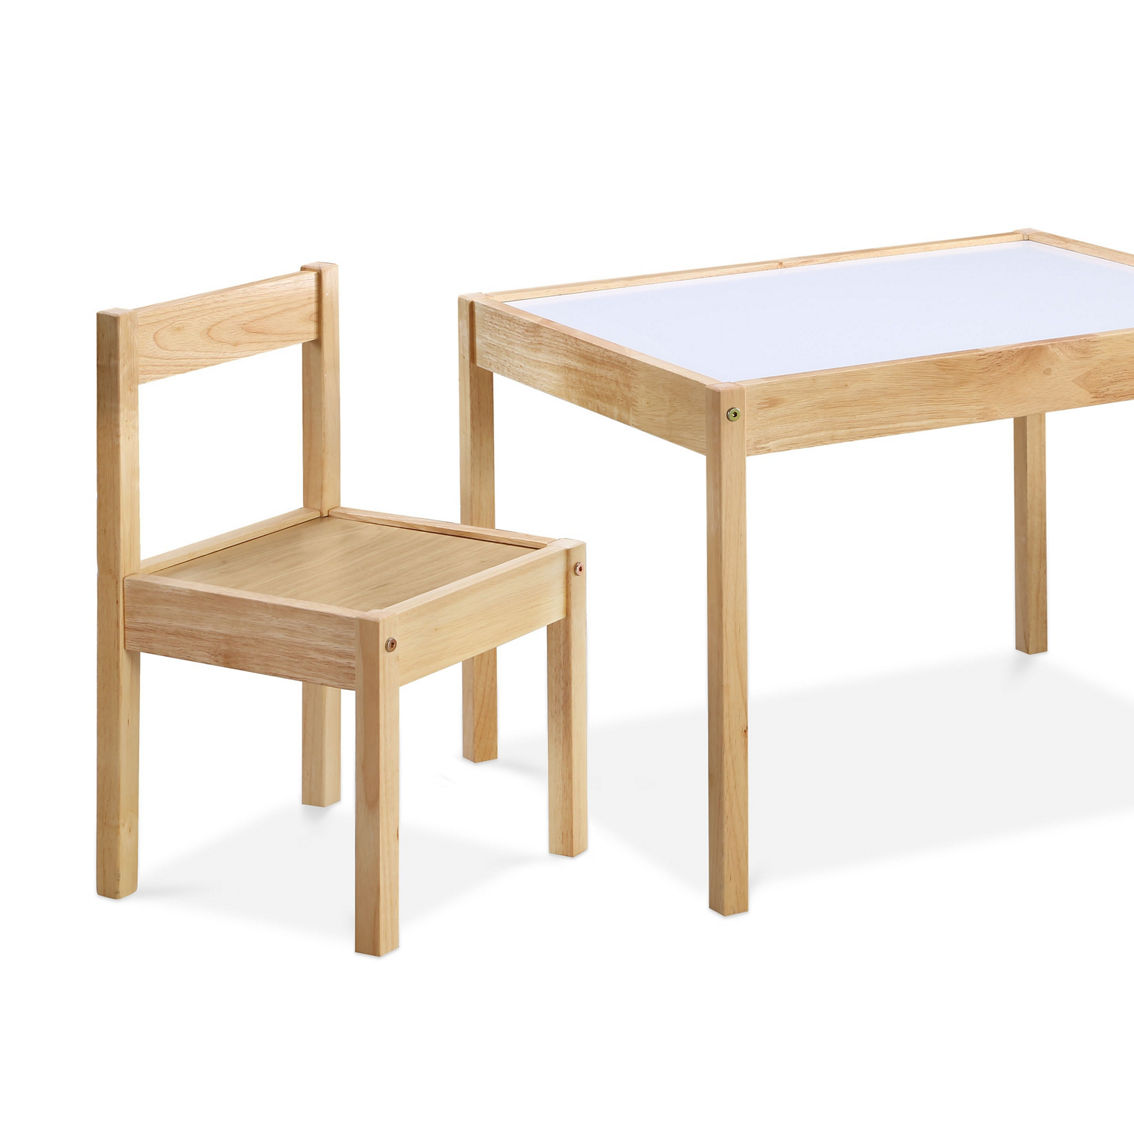 Olive & Opie Gibson 3-Piece Dry Erase Kids Table & Chair Set, Natural - Image 2 of 5